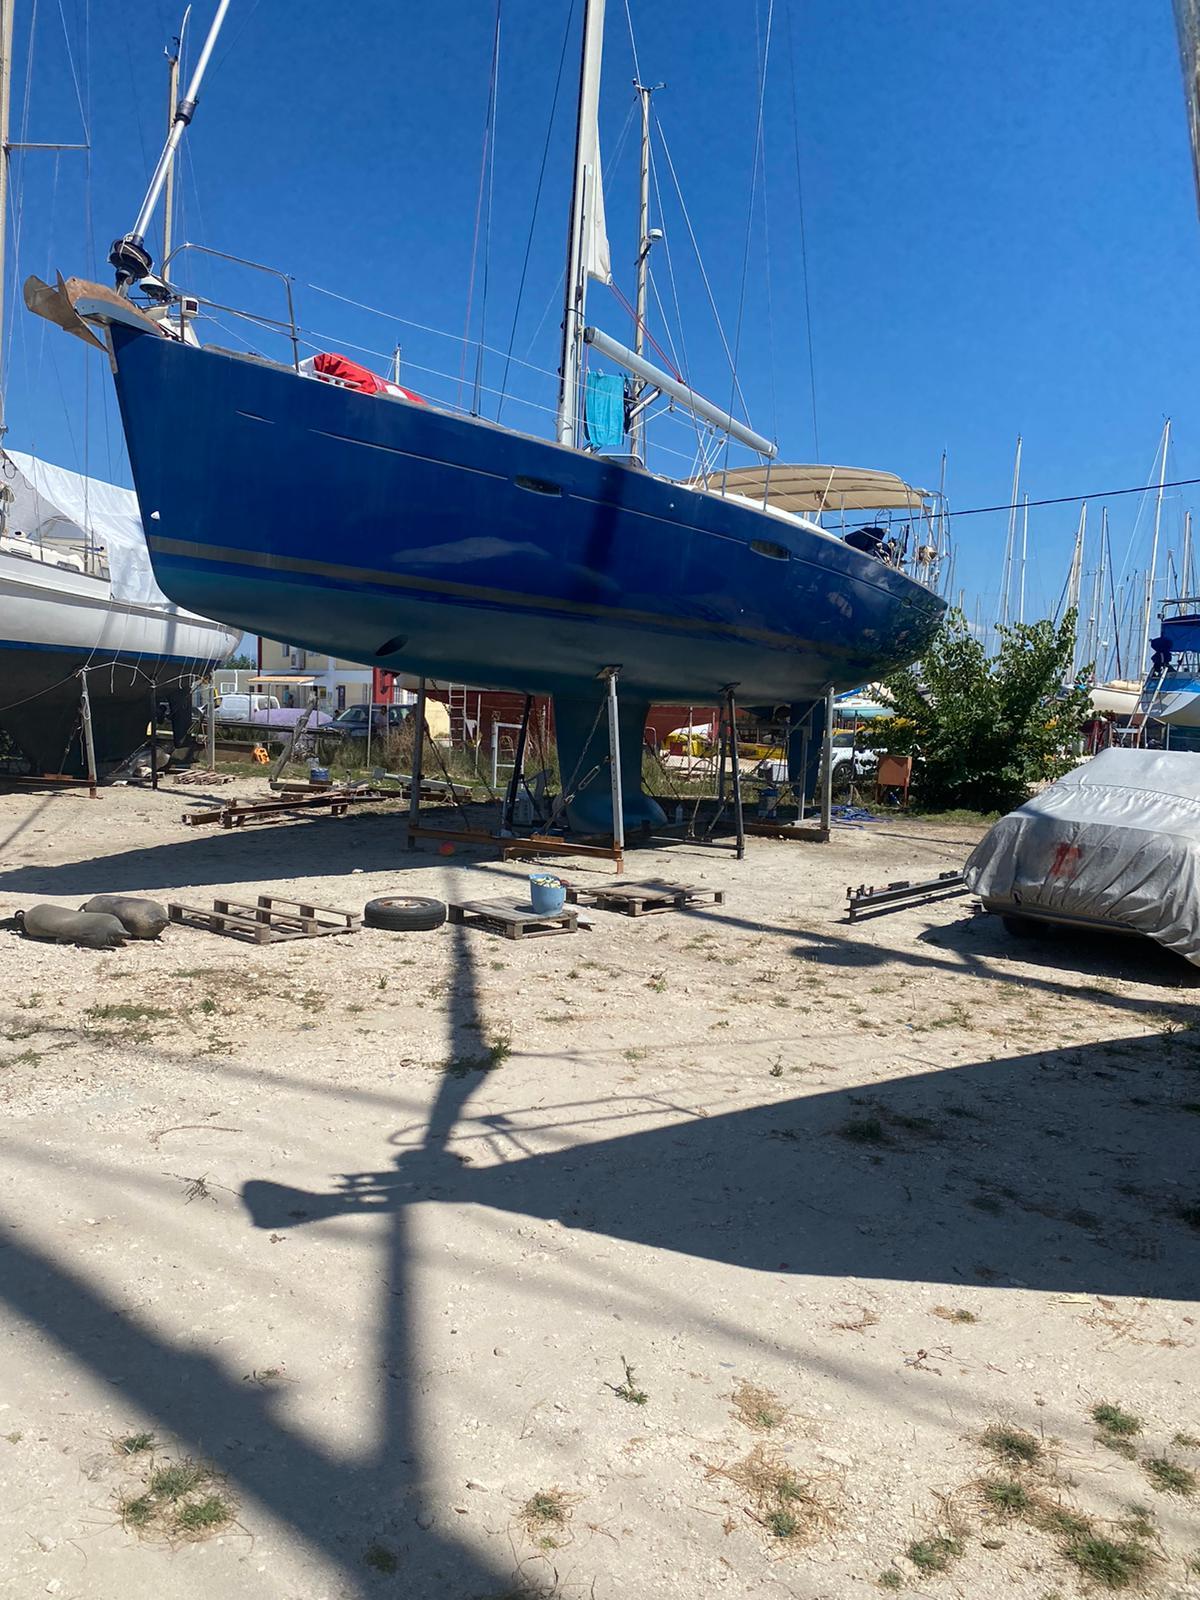 yachts for sale in preveza greece